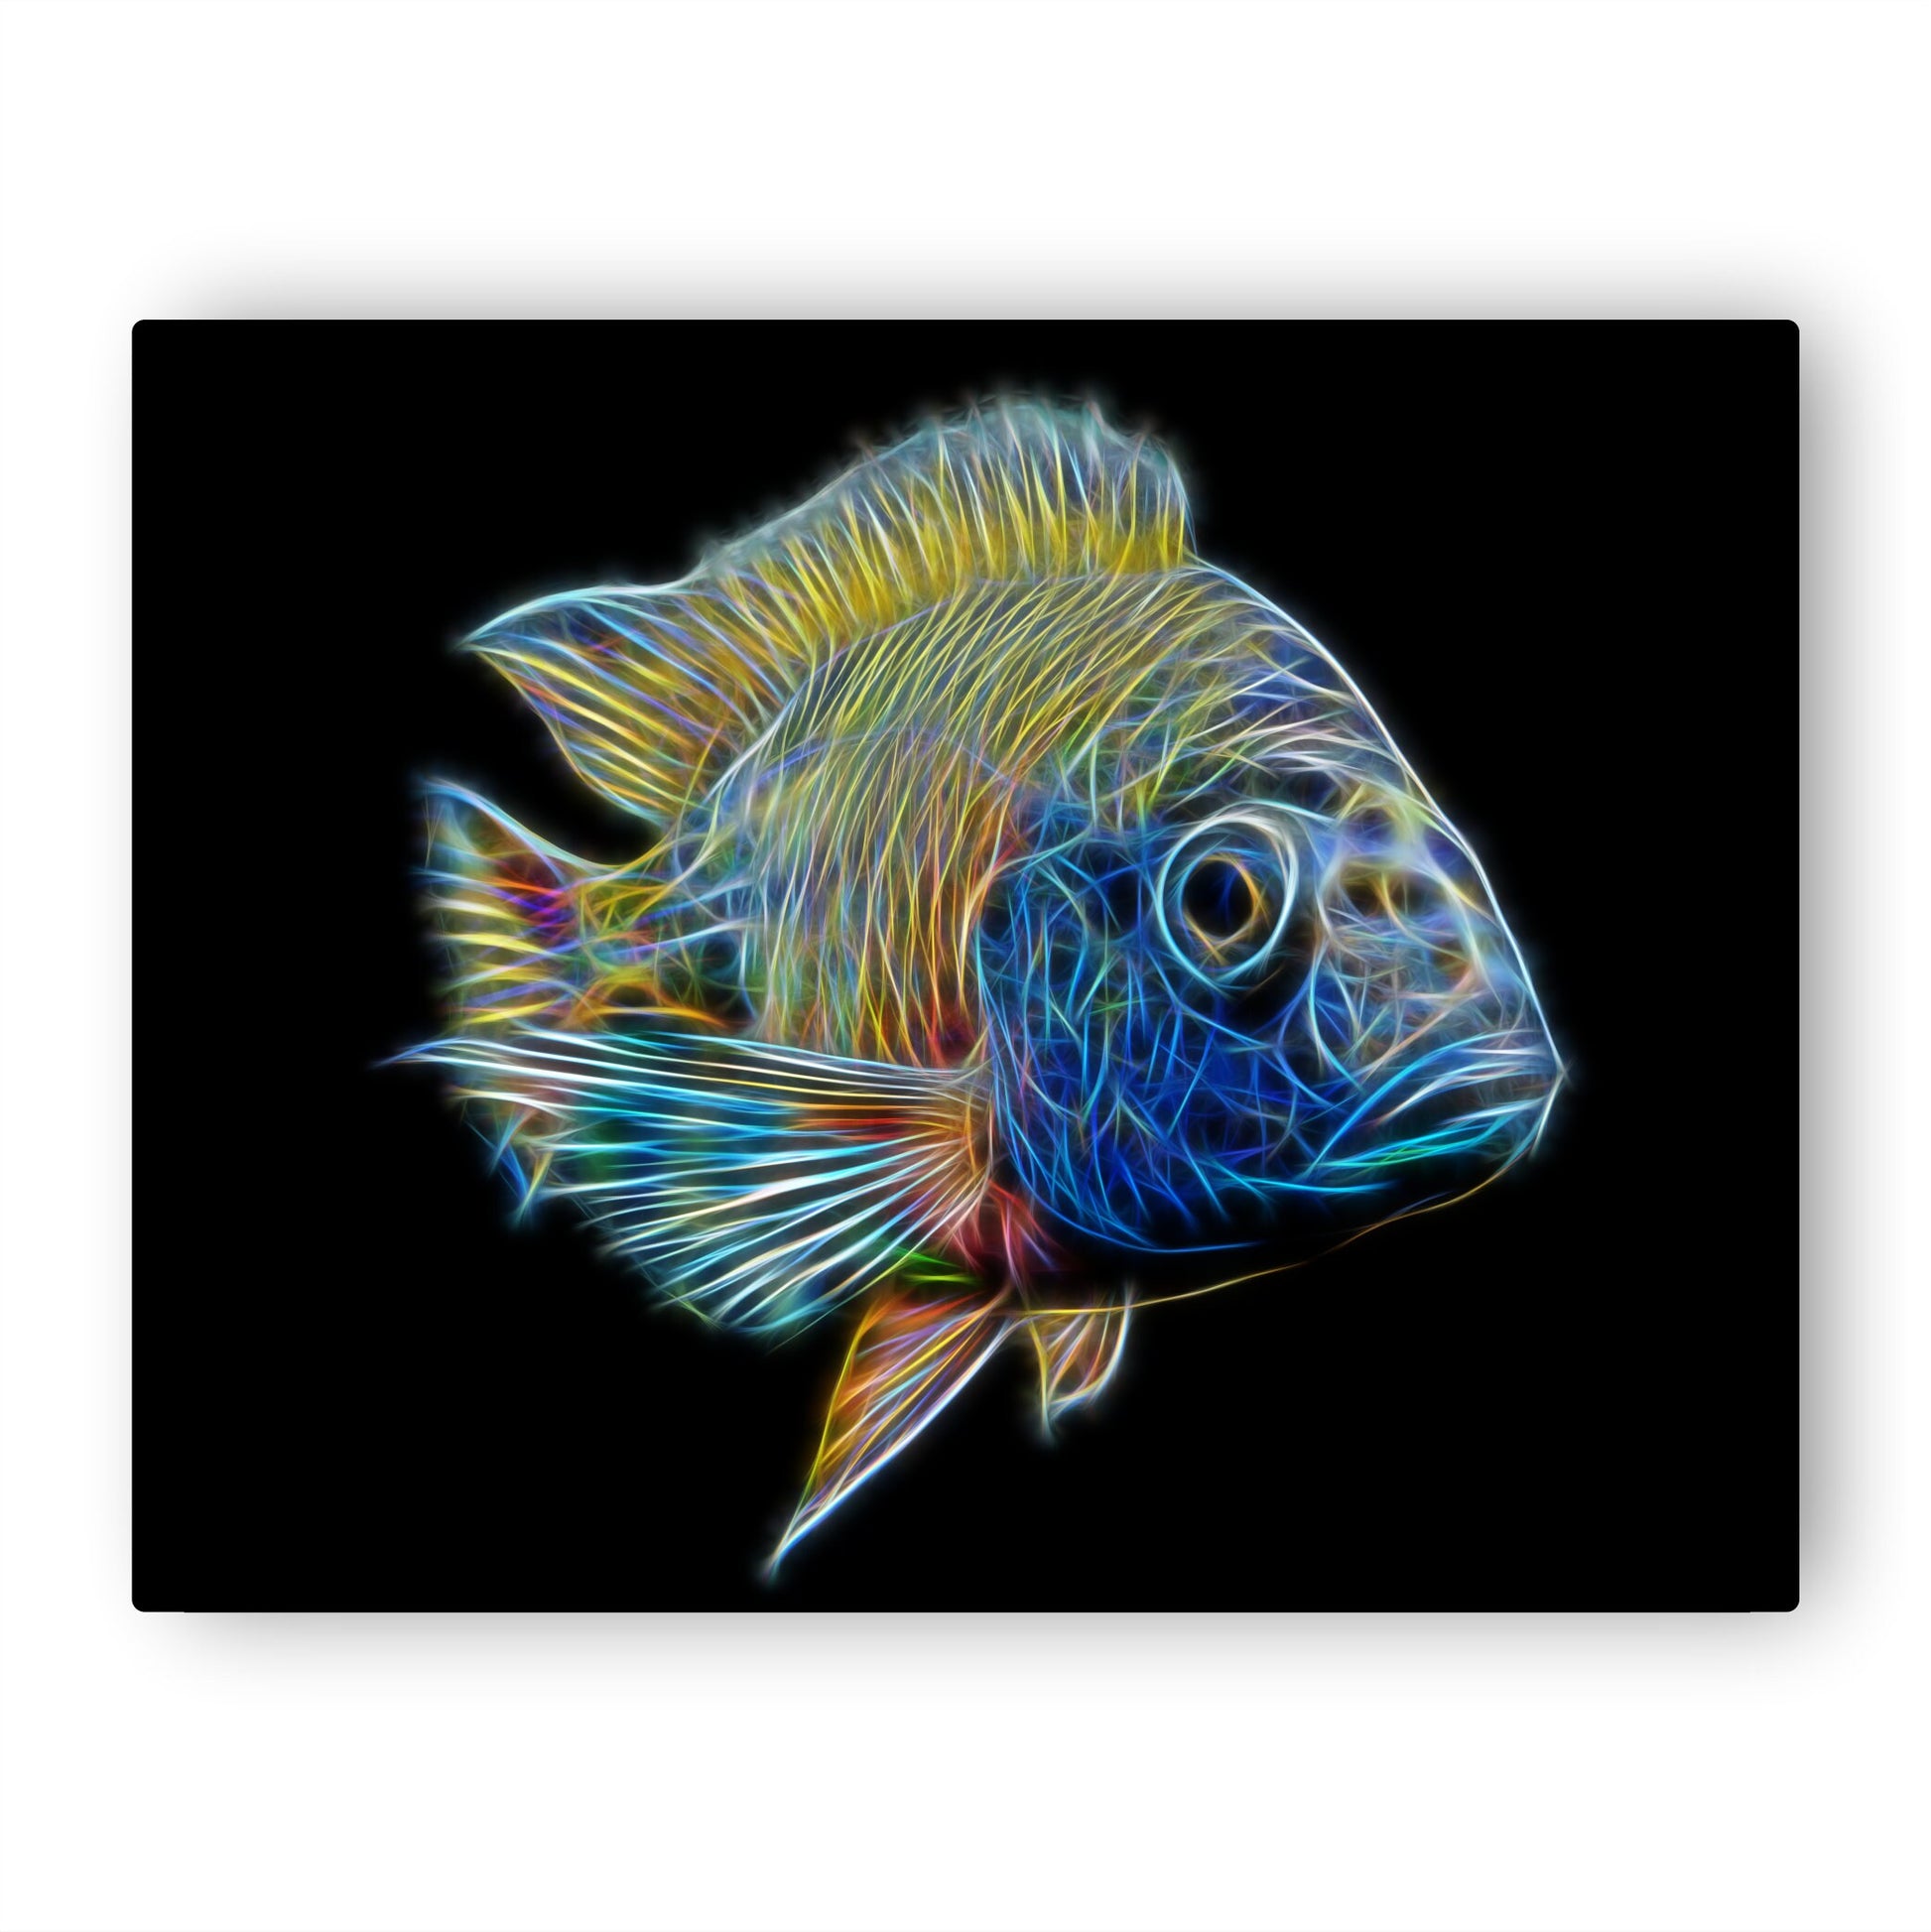 Ruby Red Peacock Cichlid Aluminium Metal Wall Plaque with Stunning Fractal Art Design.  Aulonocara Rubescens